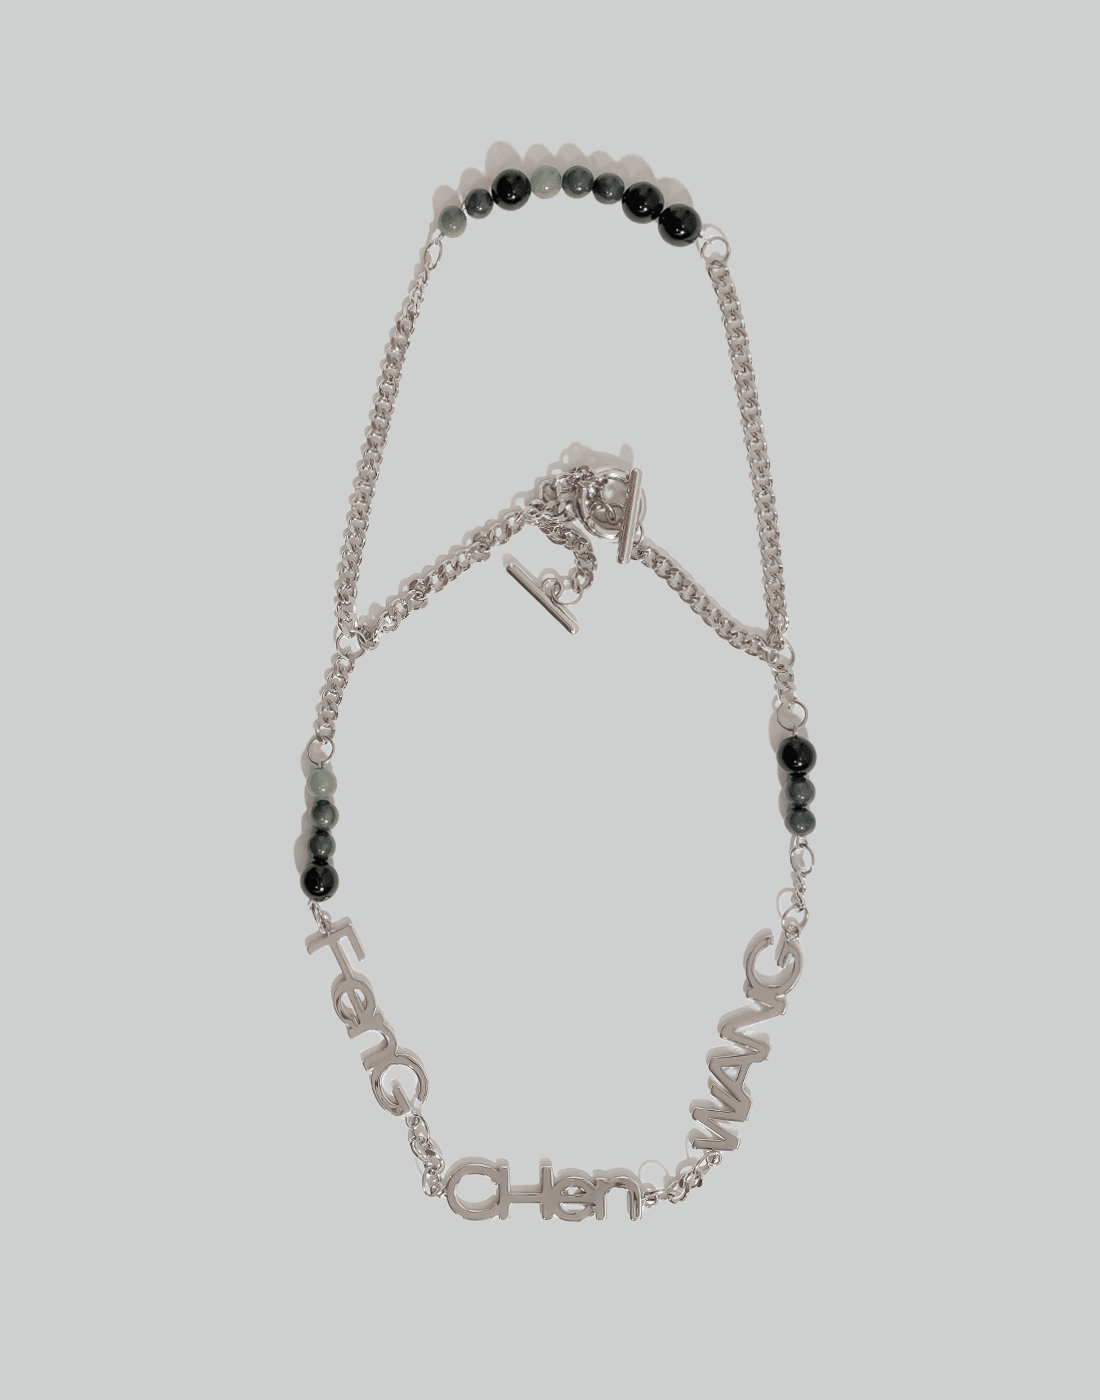 FENG CHEN WANG JADE ONYX NECKLACE – 082plus